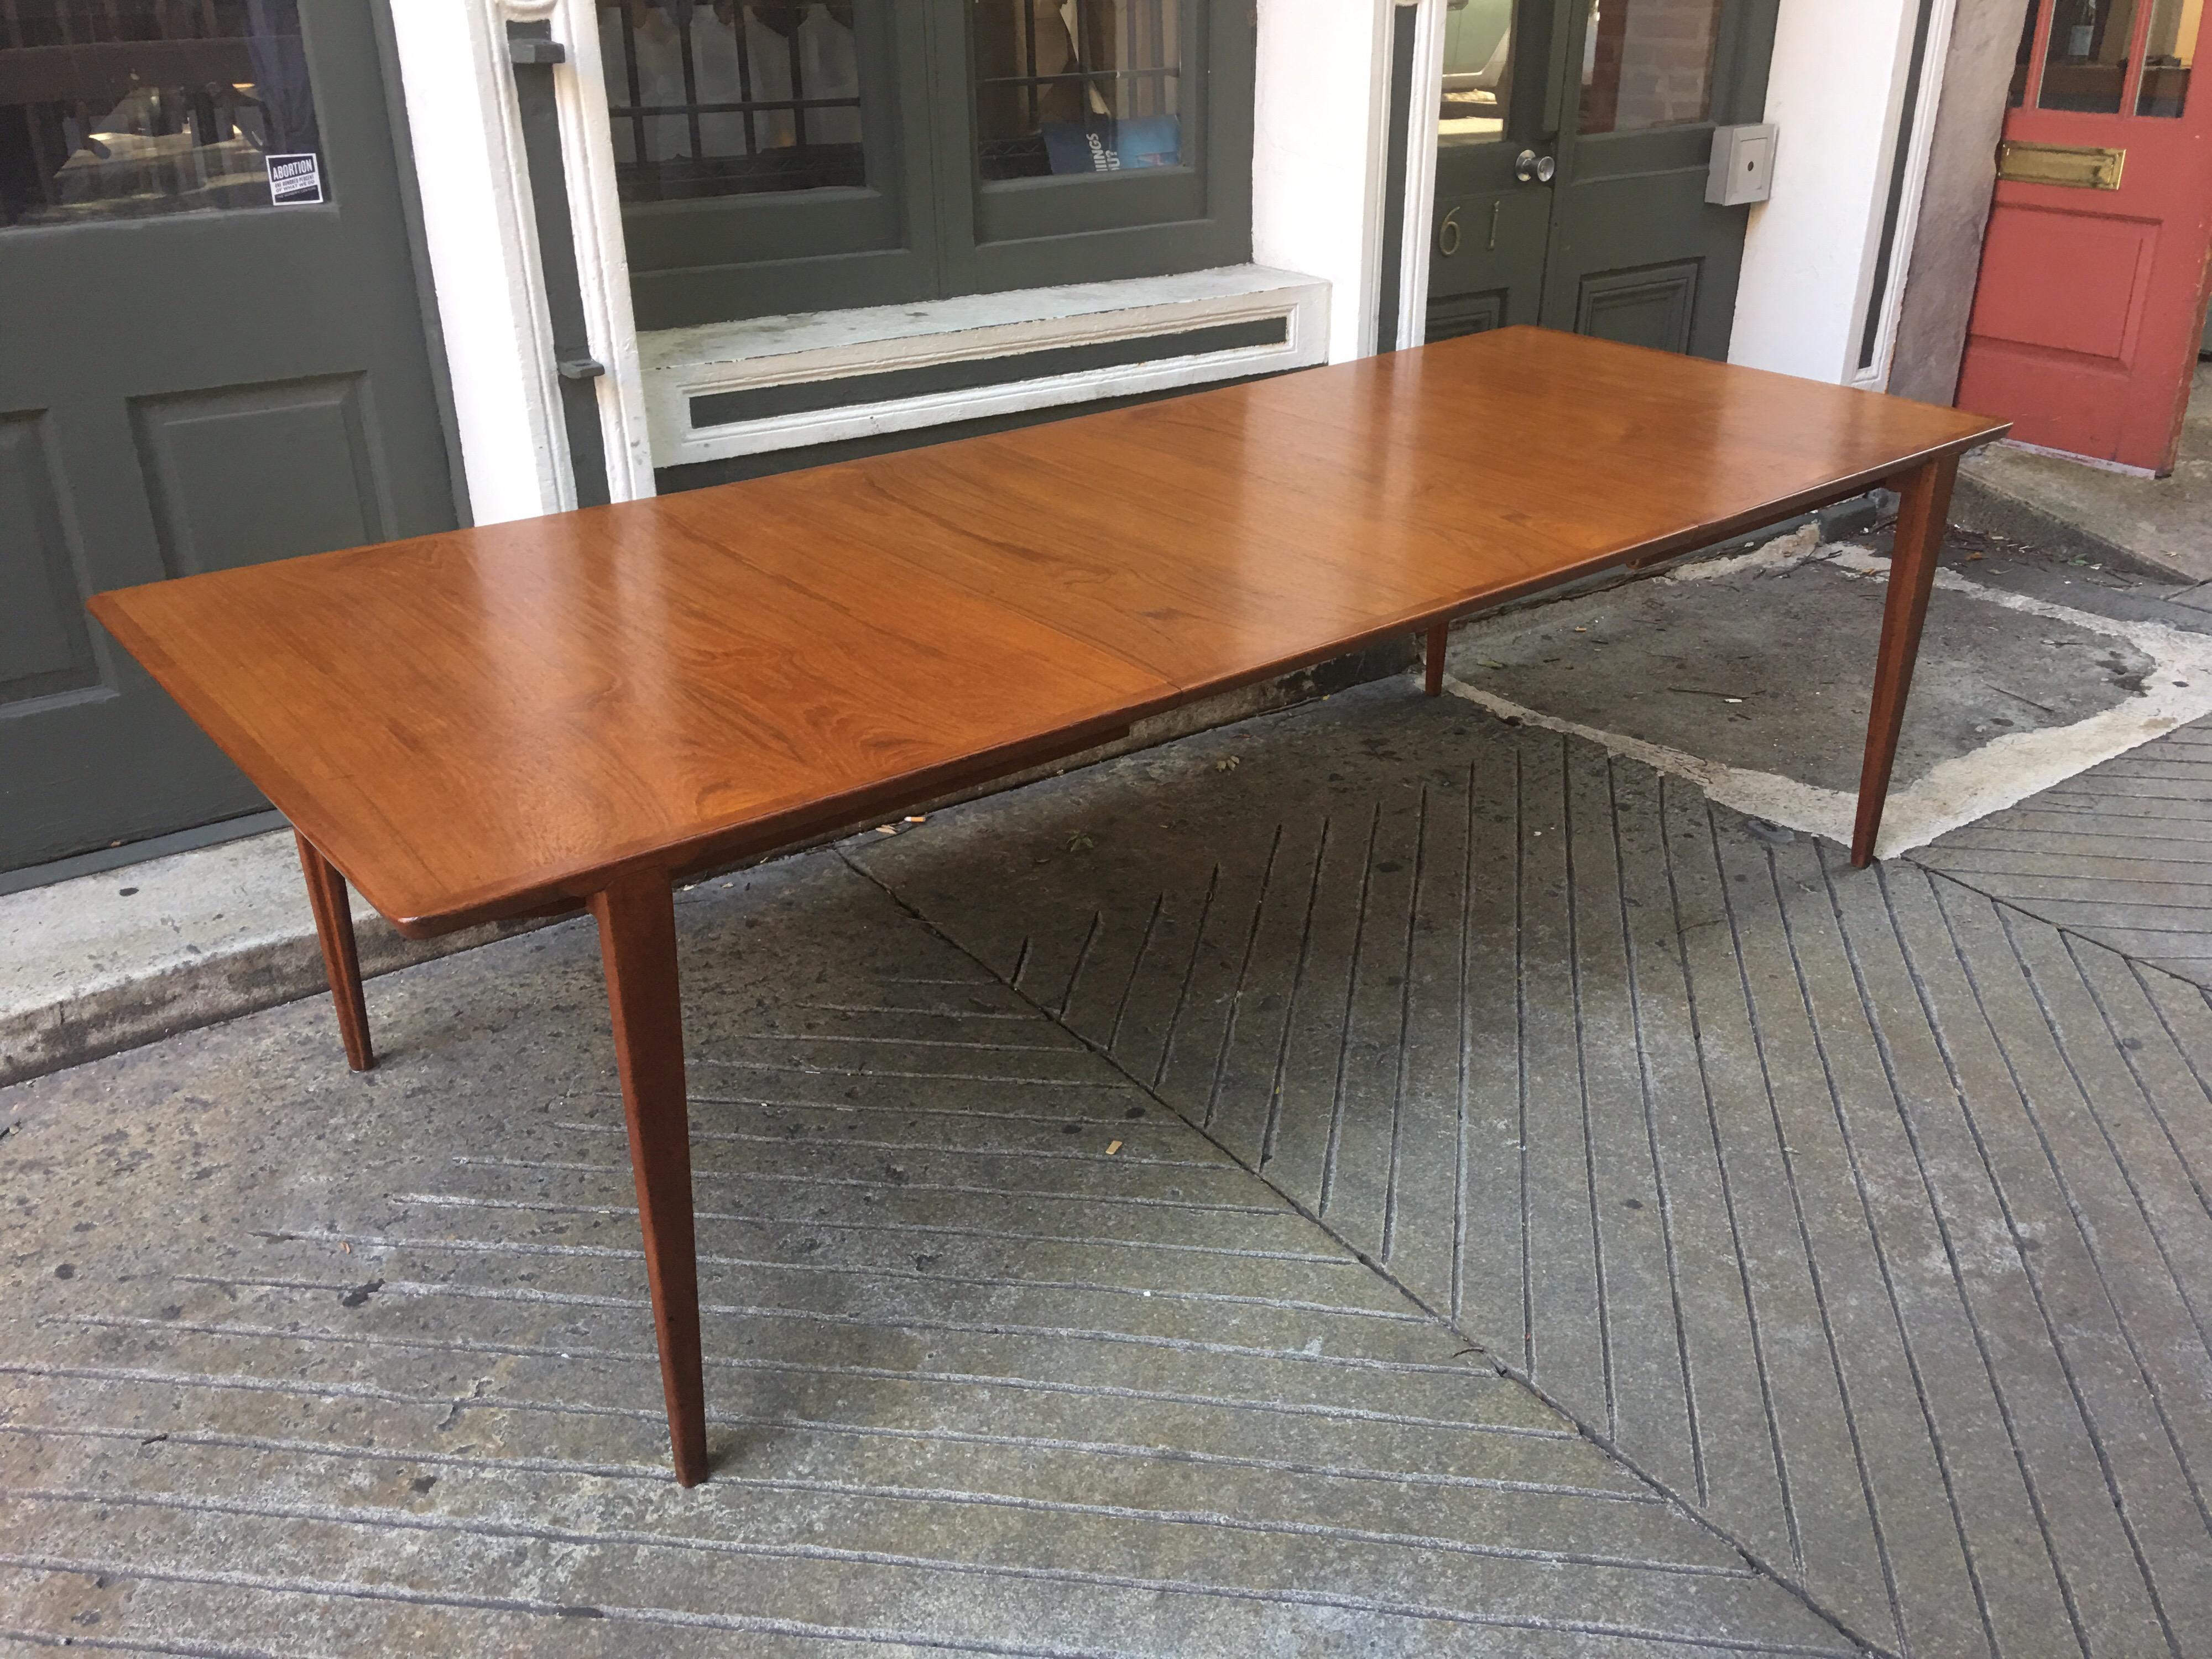 1960s teak dining table with 2 leaves. Leaves can be stored in table. Nice simple lines give this table a sleek appearance! Each leaf adds 17